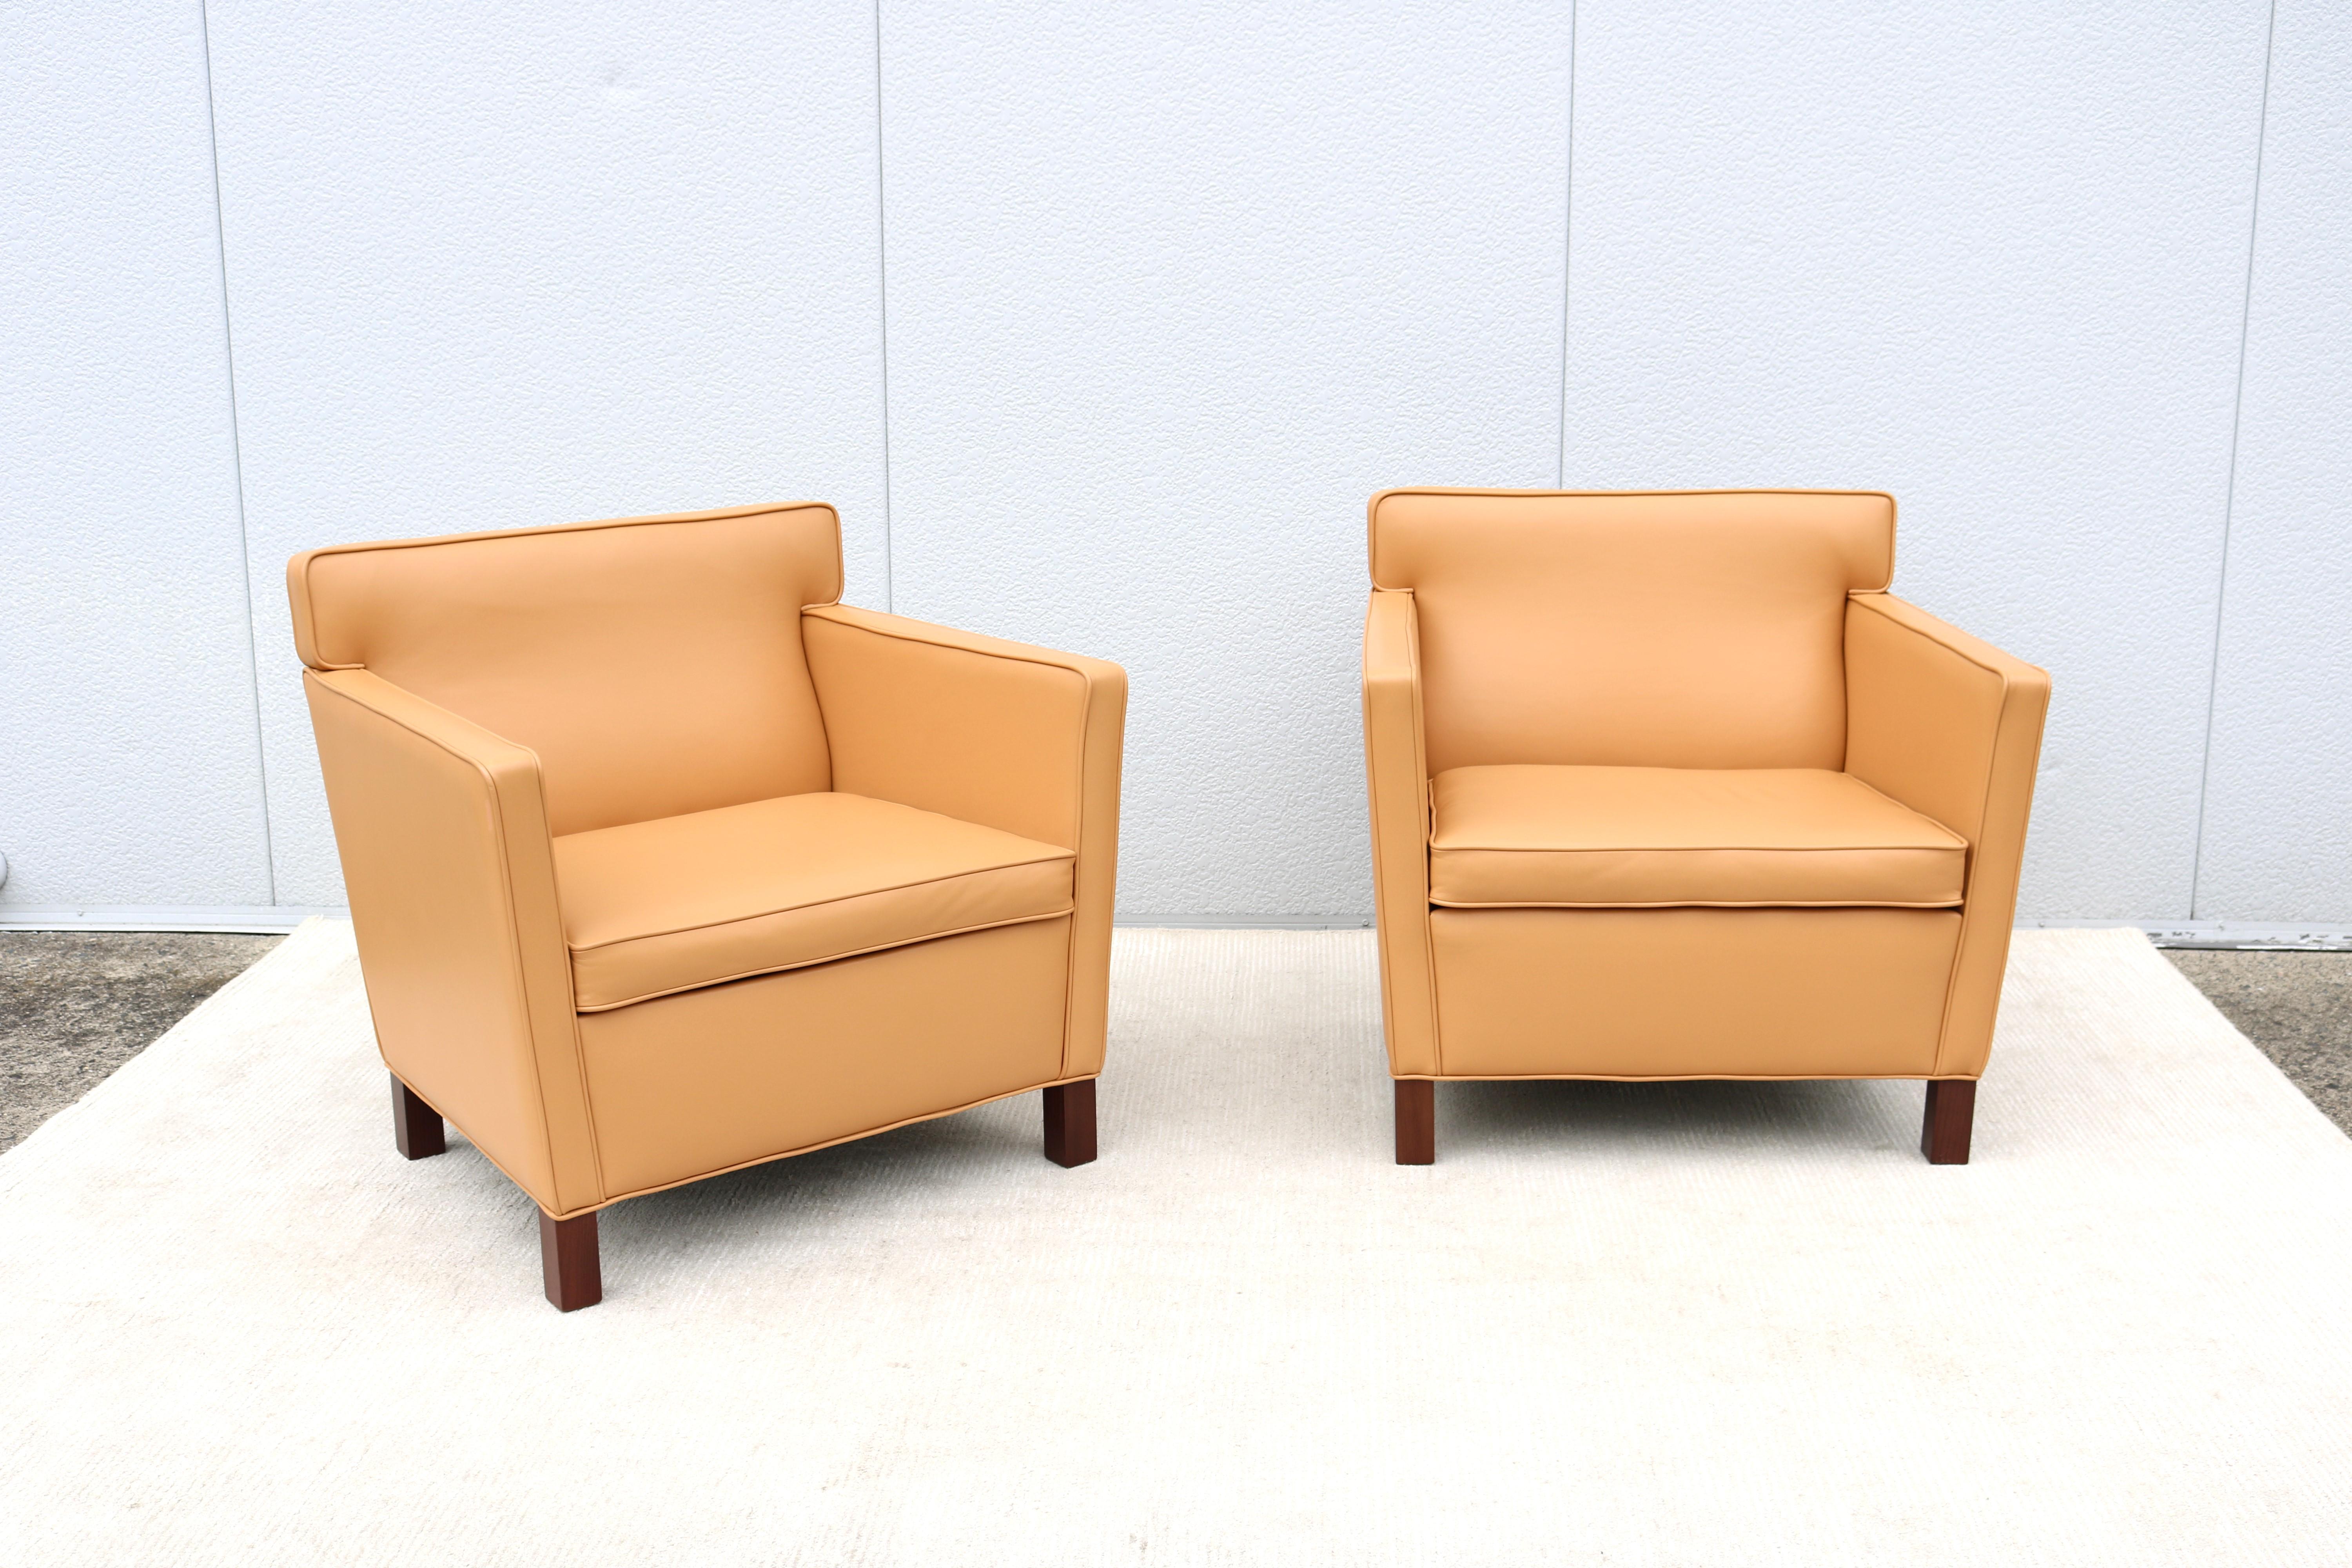 Classic and timeless design authentic pair of Krefeld lounge chairs.
Mid-Century Modern was originally Designed by Ludwig Mies van der Rohe in 1927 for the Esters and Lange residences in Krefeld, Germany.
One of the most popular designs of the 20th